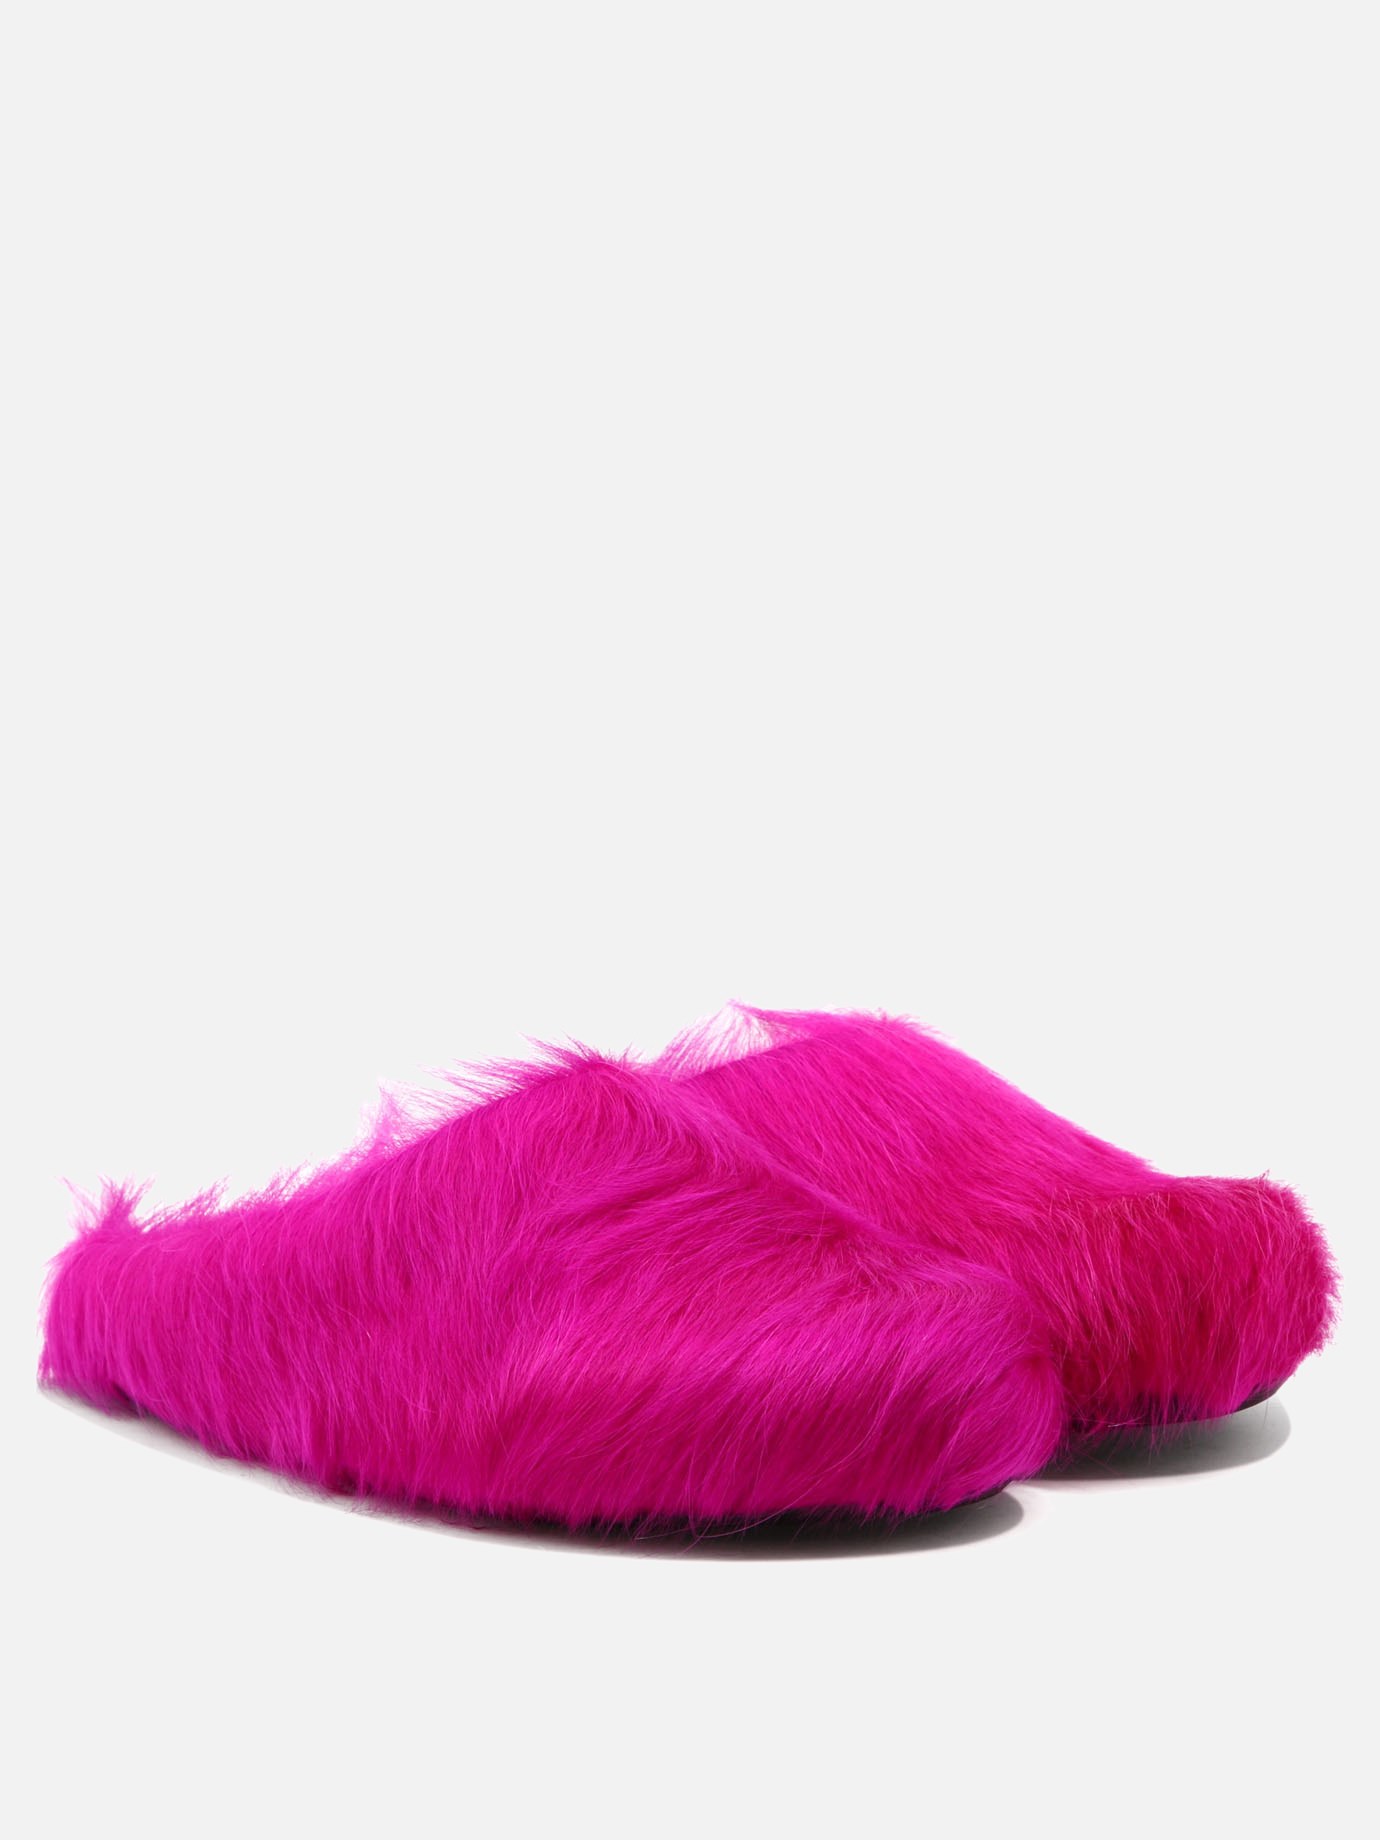  Fussbet  slippers by Marni